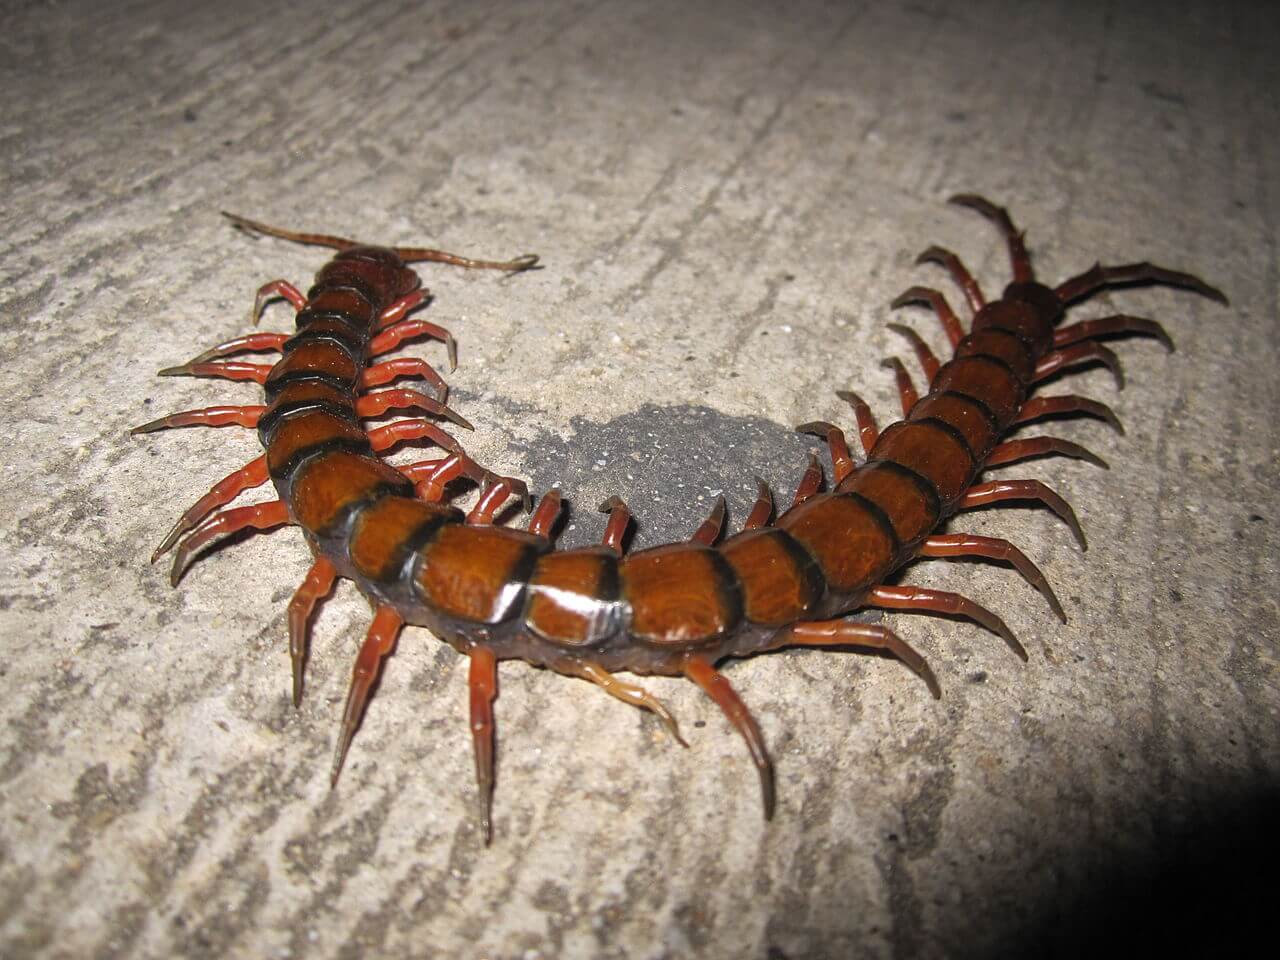 A Scolopendra walking on a cement floor.